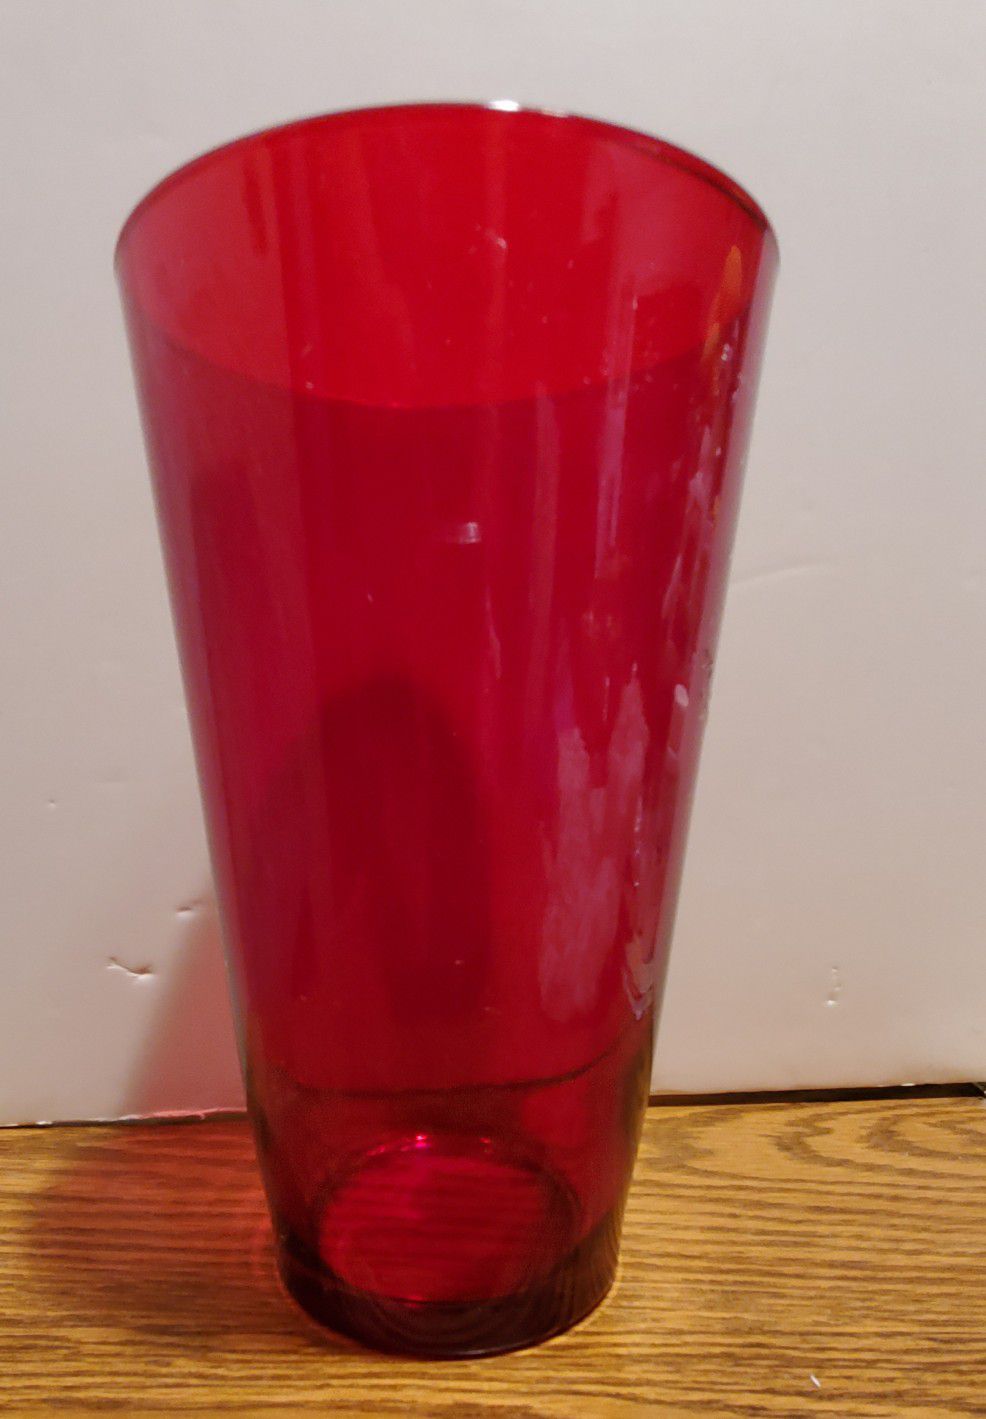 RED GLASS FLOWER VASE 9 " INCHES TALL PRE-OWNED A SMALL TEDDY BEAR BONUS